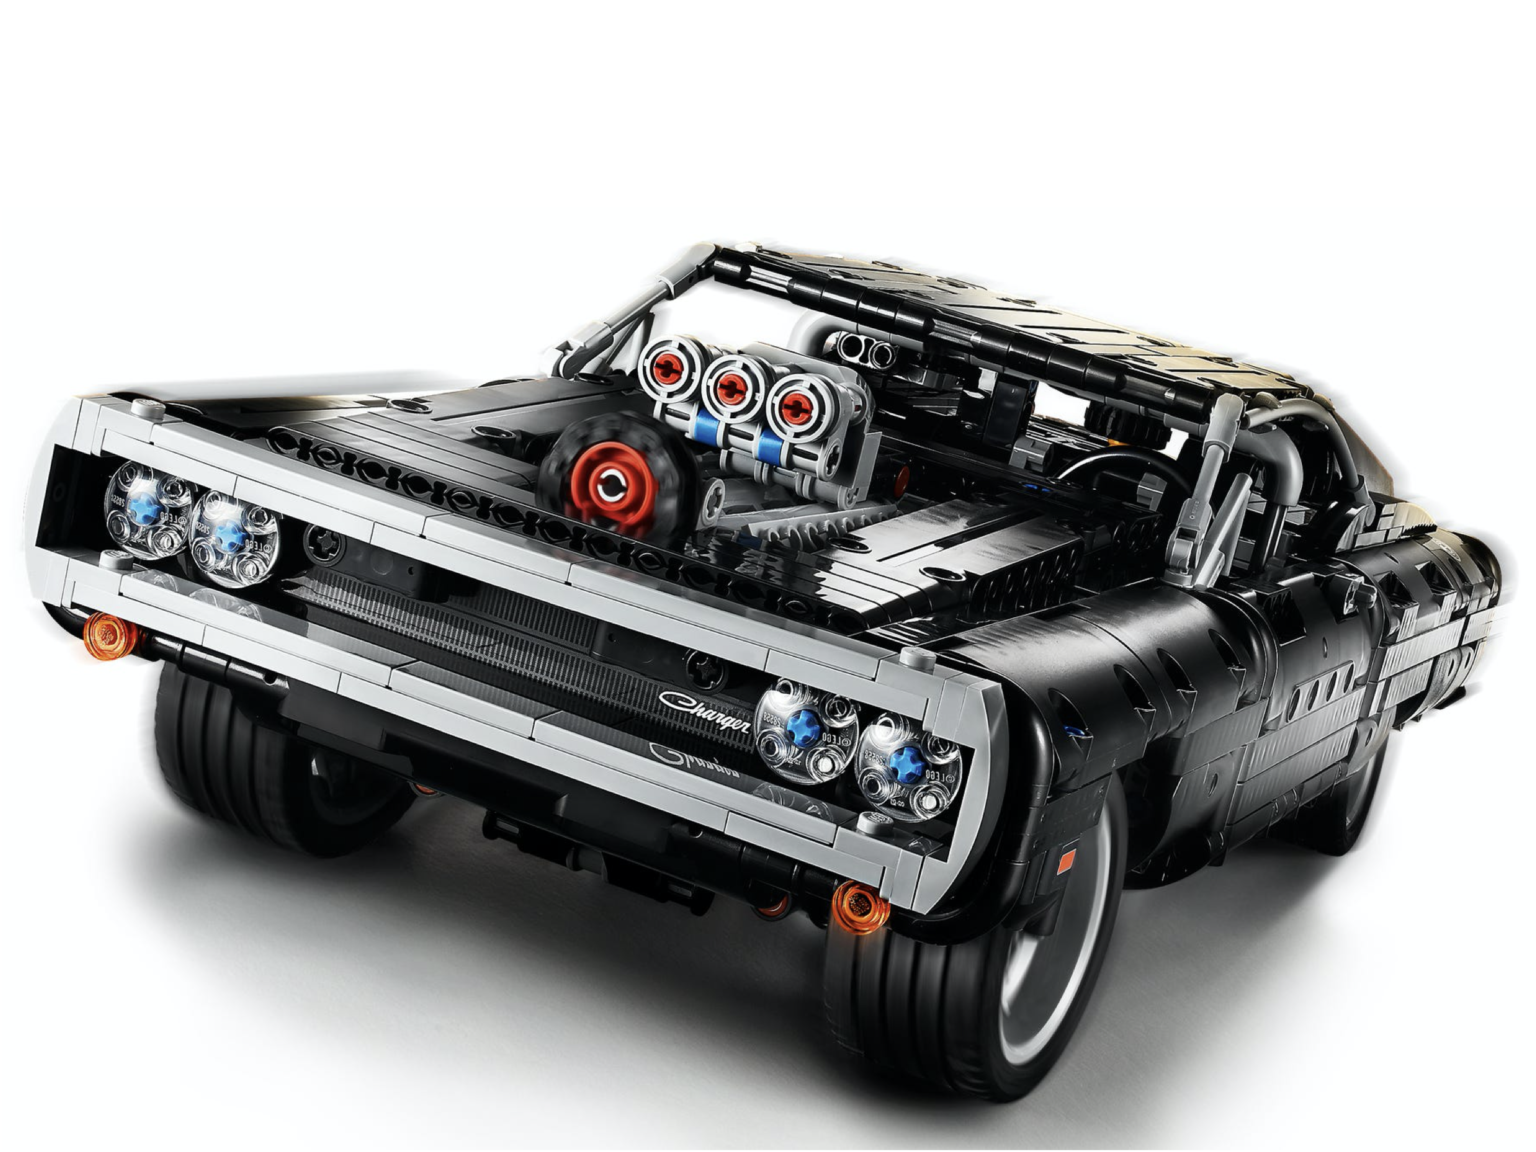 LEGO has given one of the cars from the "Fast & Furious" franchise the full Technic treatment.